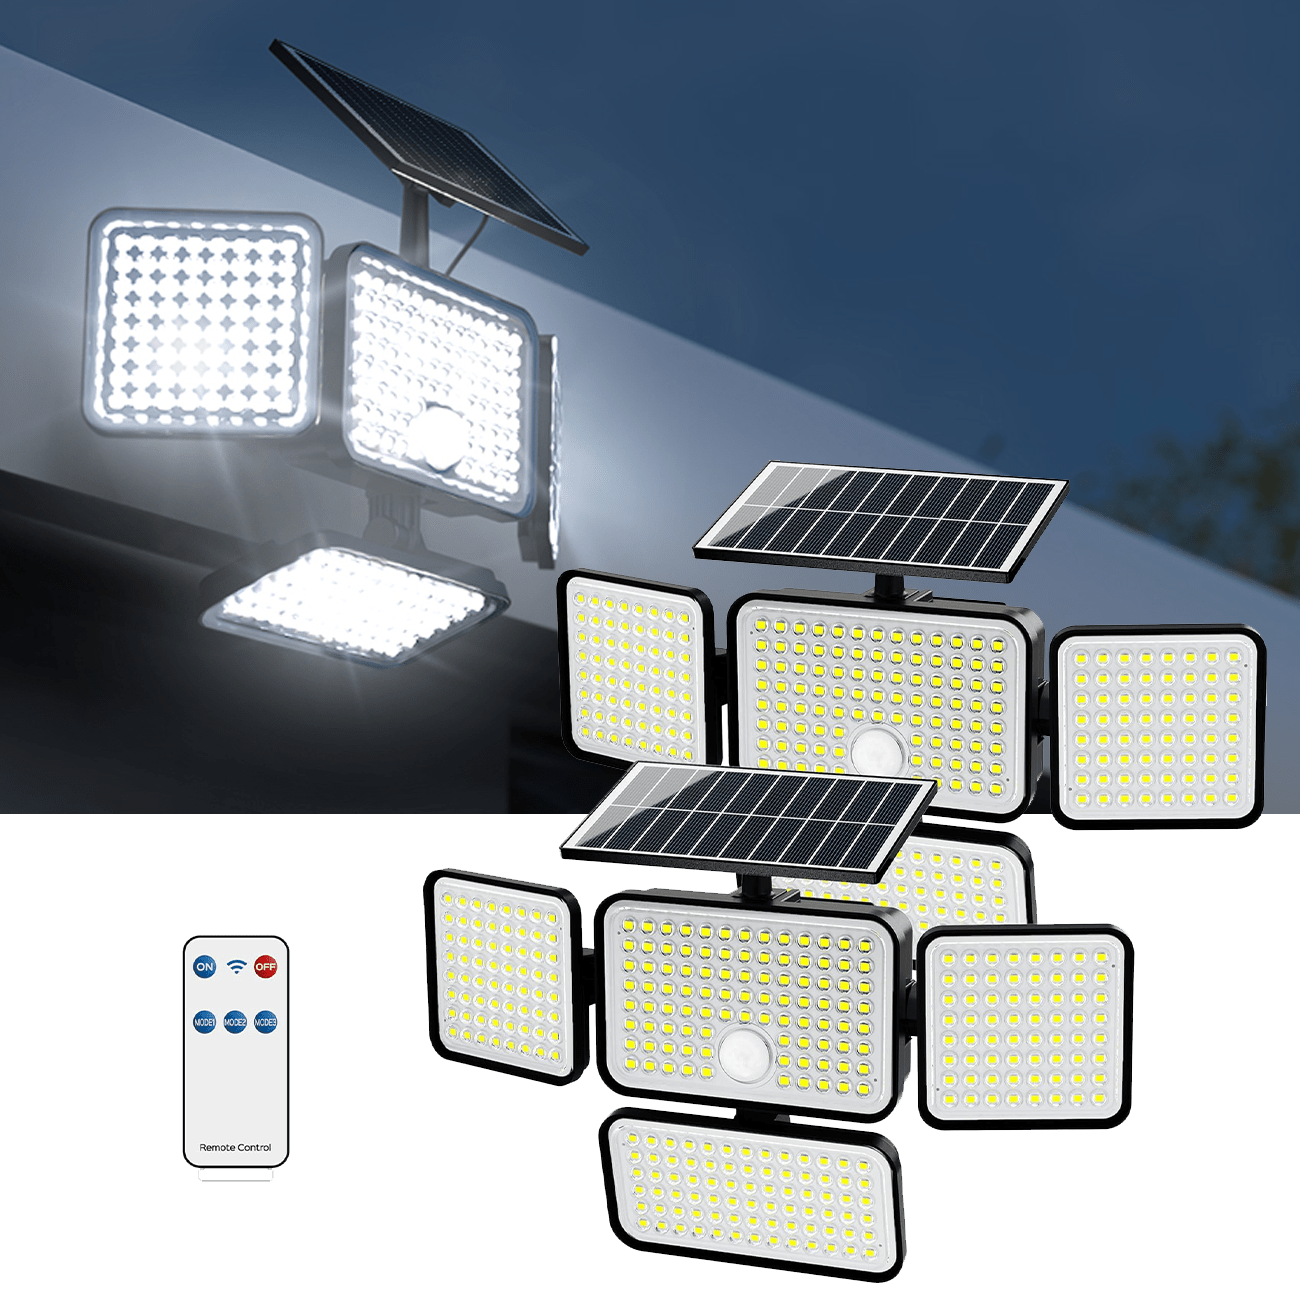 

Jackyled Solar Outdoor Lights 2500lm 304 Led Security Lights With Remote Control, 4 Heads Motion Sensor Lights, Waterproof 270° Wide Angle Flood Wall Lights With 3 Modes (2 Packs)